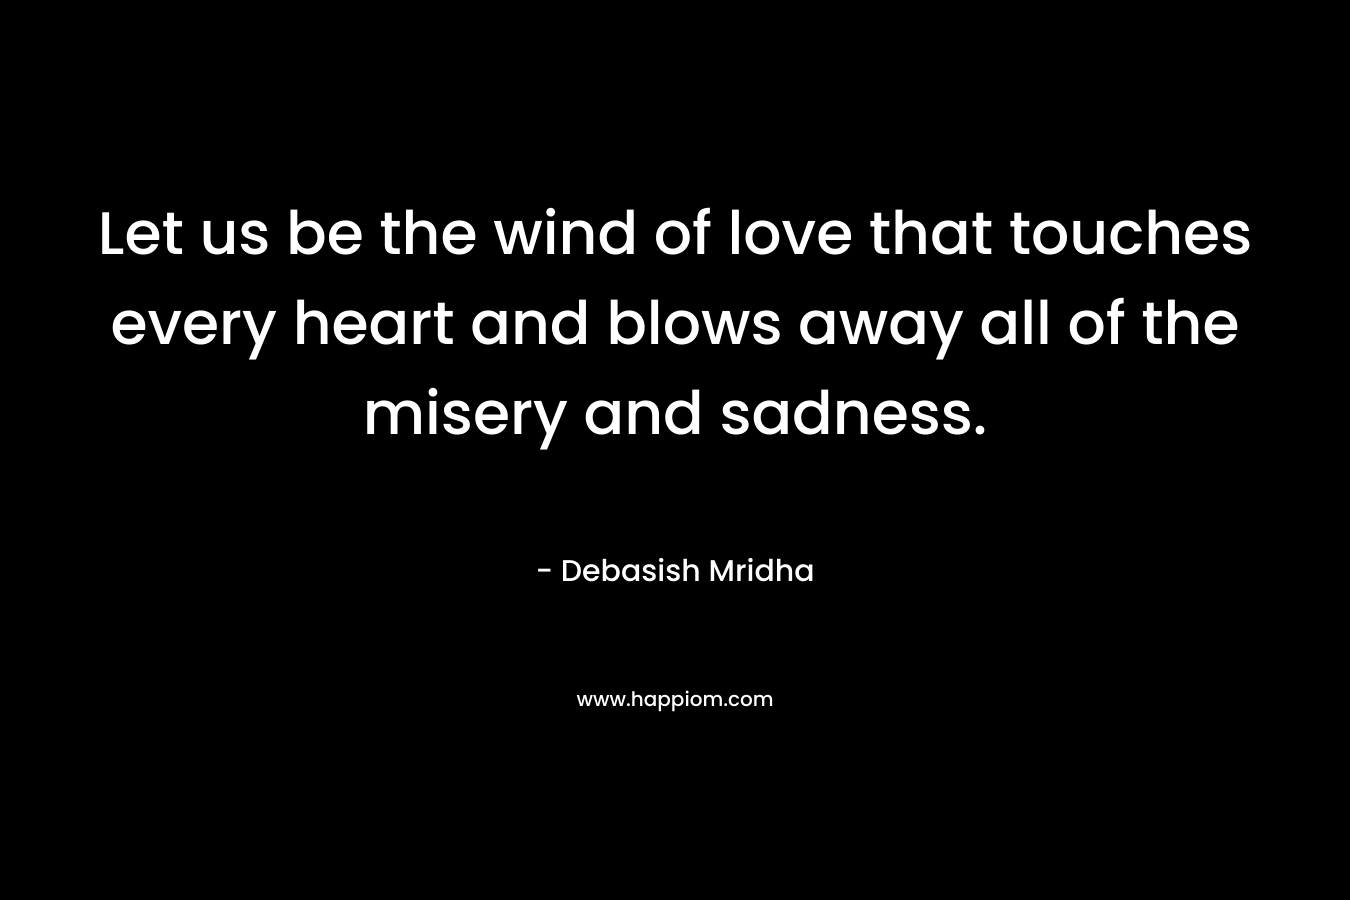 Let us be the wind of love that touches every heart and blows away all of the misery and sadness.